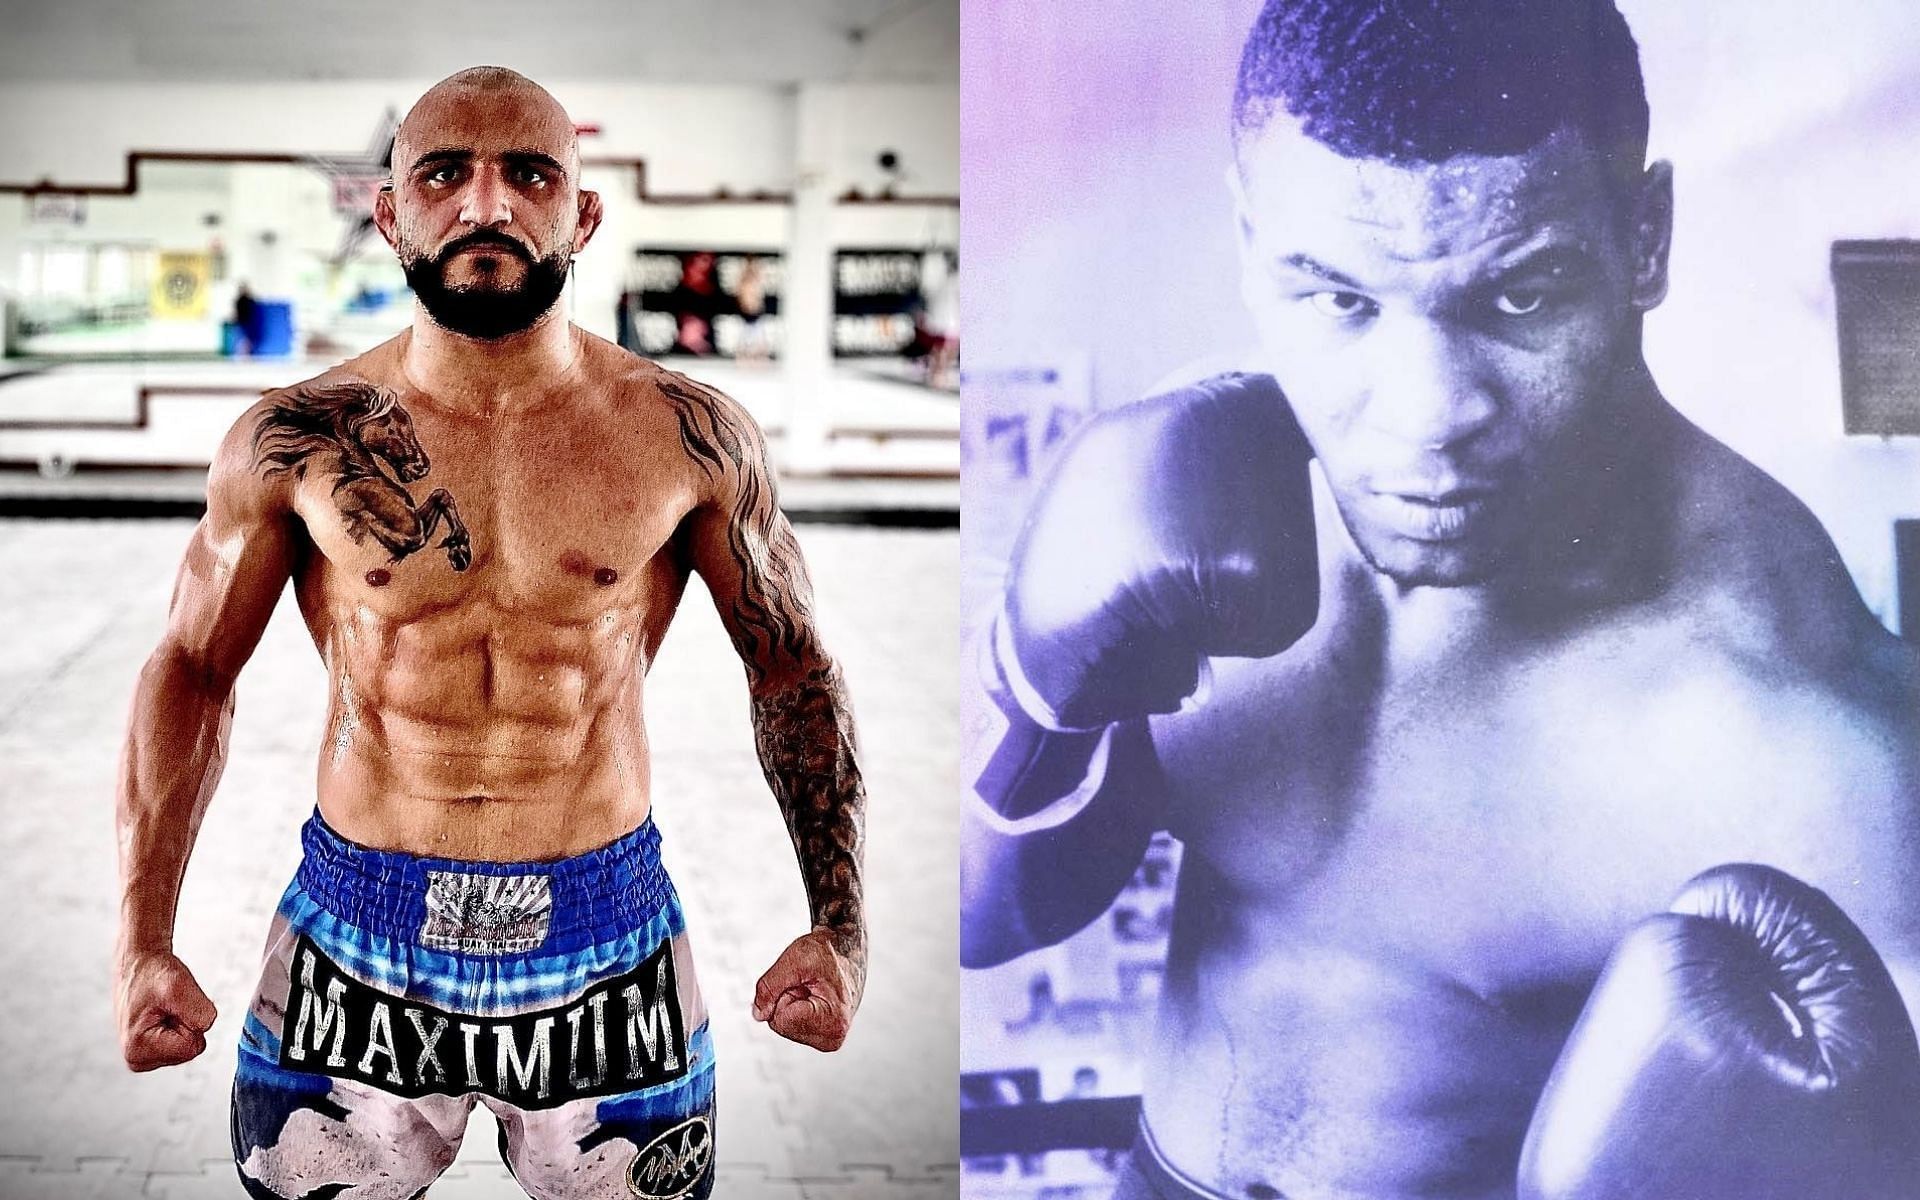 ONE CEO Chatri Sityodtong compares John Lineker&#039;s striking power to the legendary Mike Tyson. [Photos: John Lineker, Mike Tyson on Instagram]